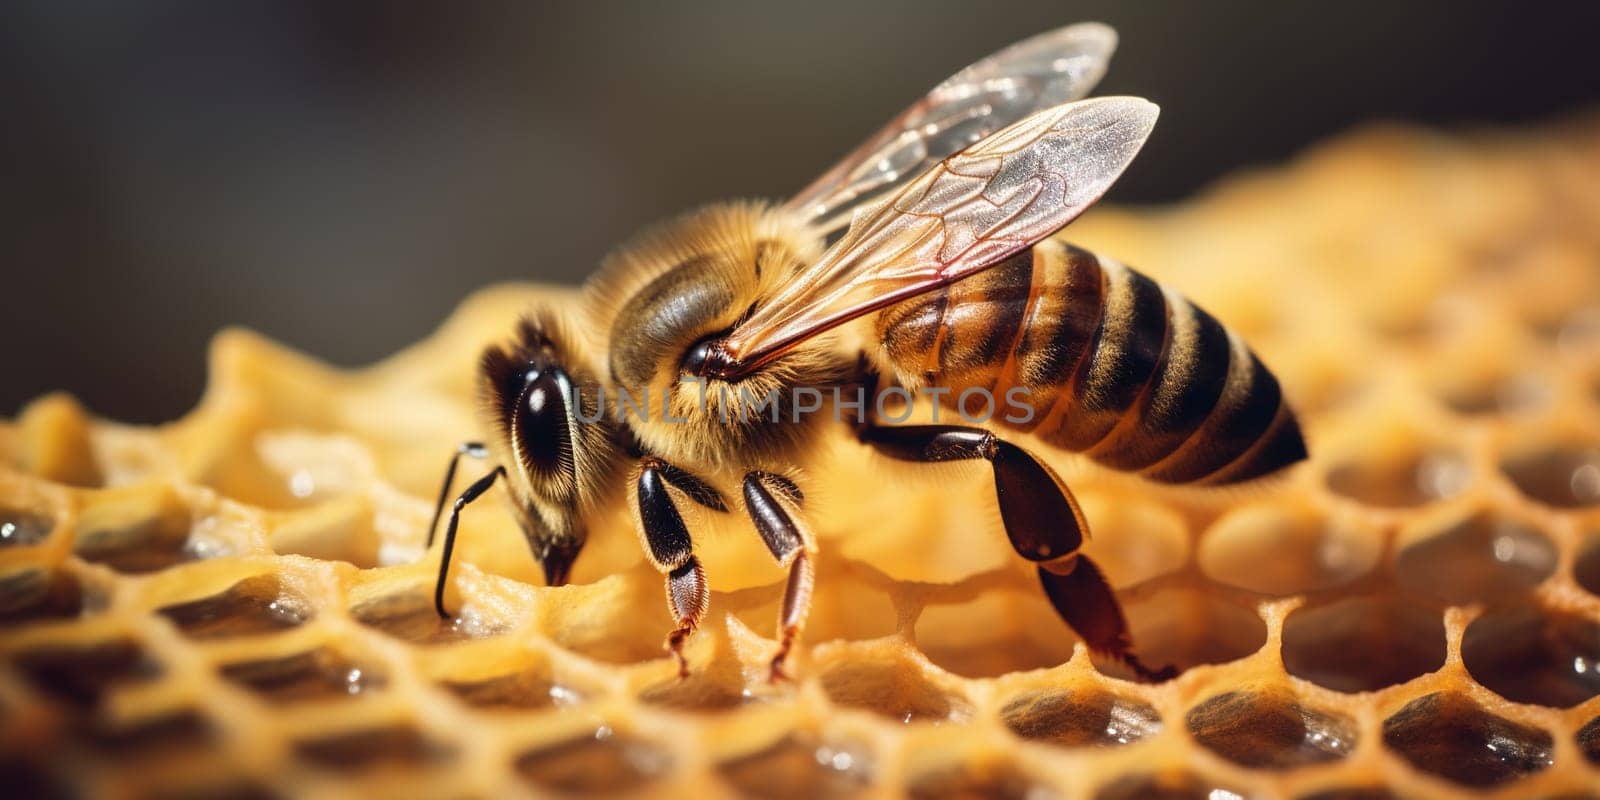 Close-up of a bee on the honeycomb eating by GekaSkr